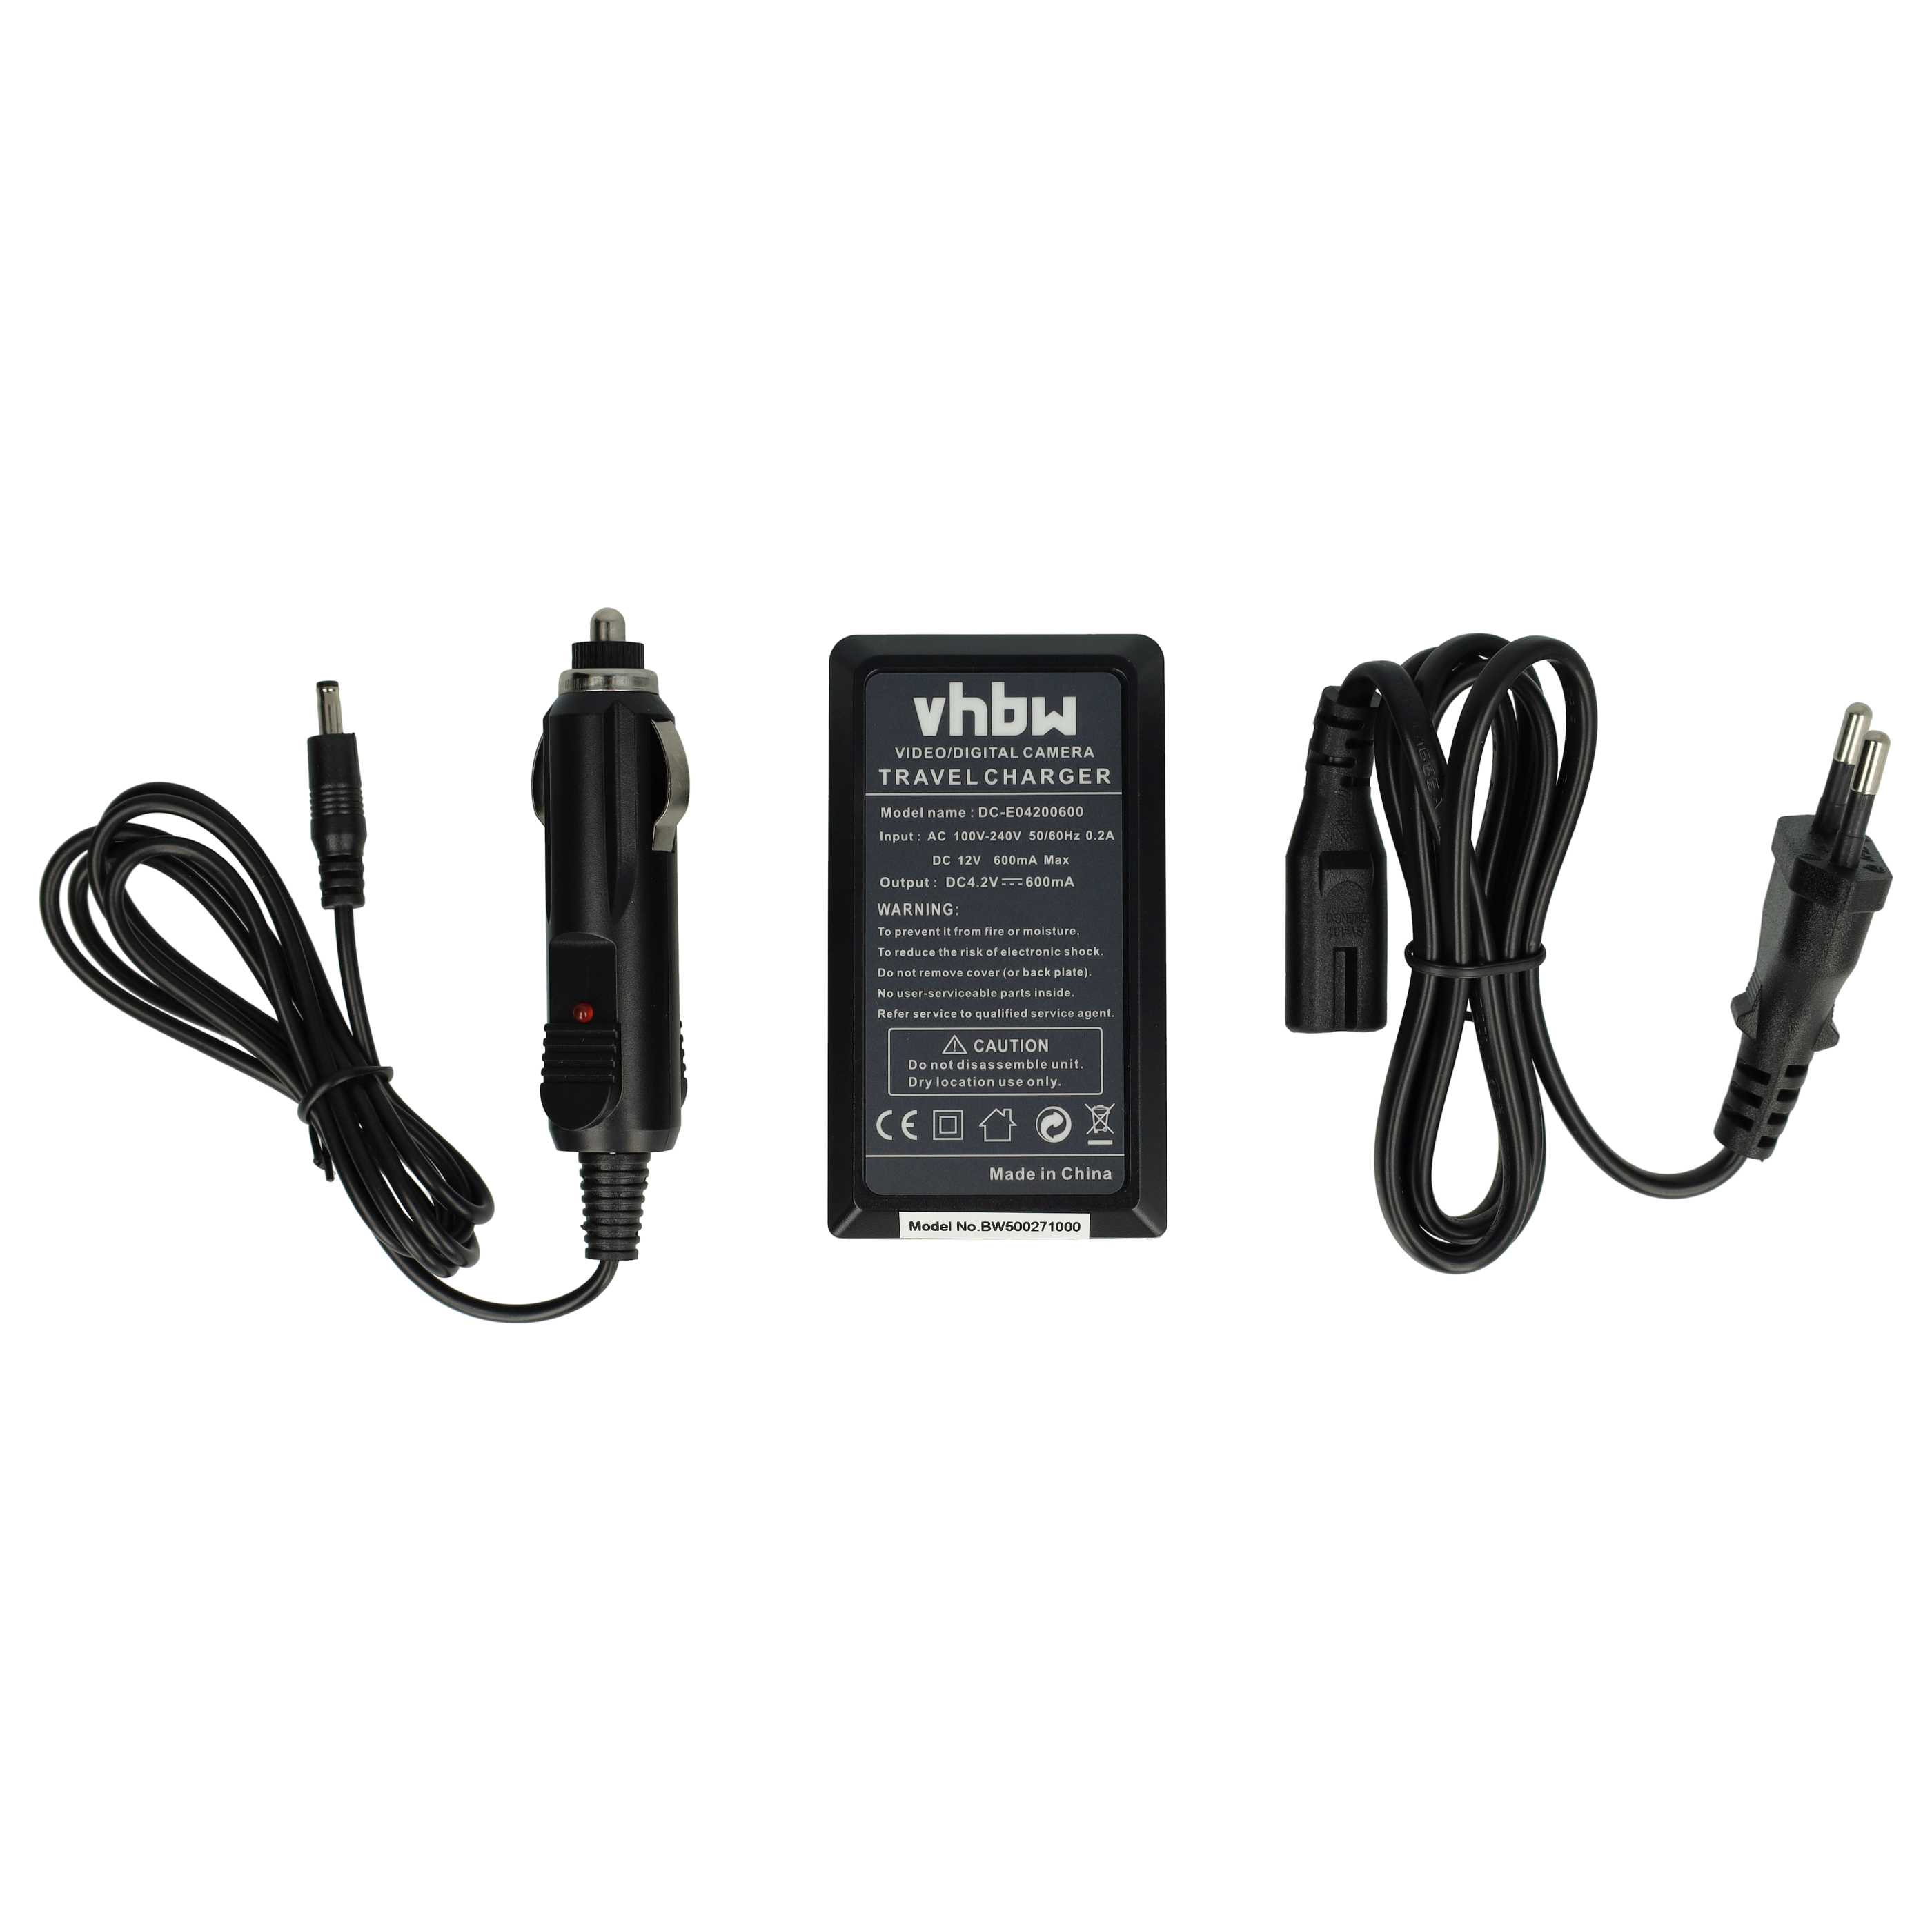 Battery Charger suitable for Digital Camera - 0.6 A, 4.2 V